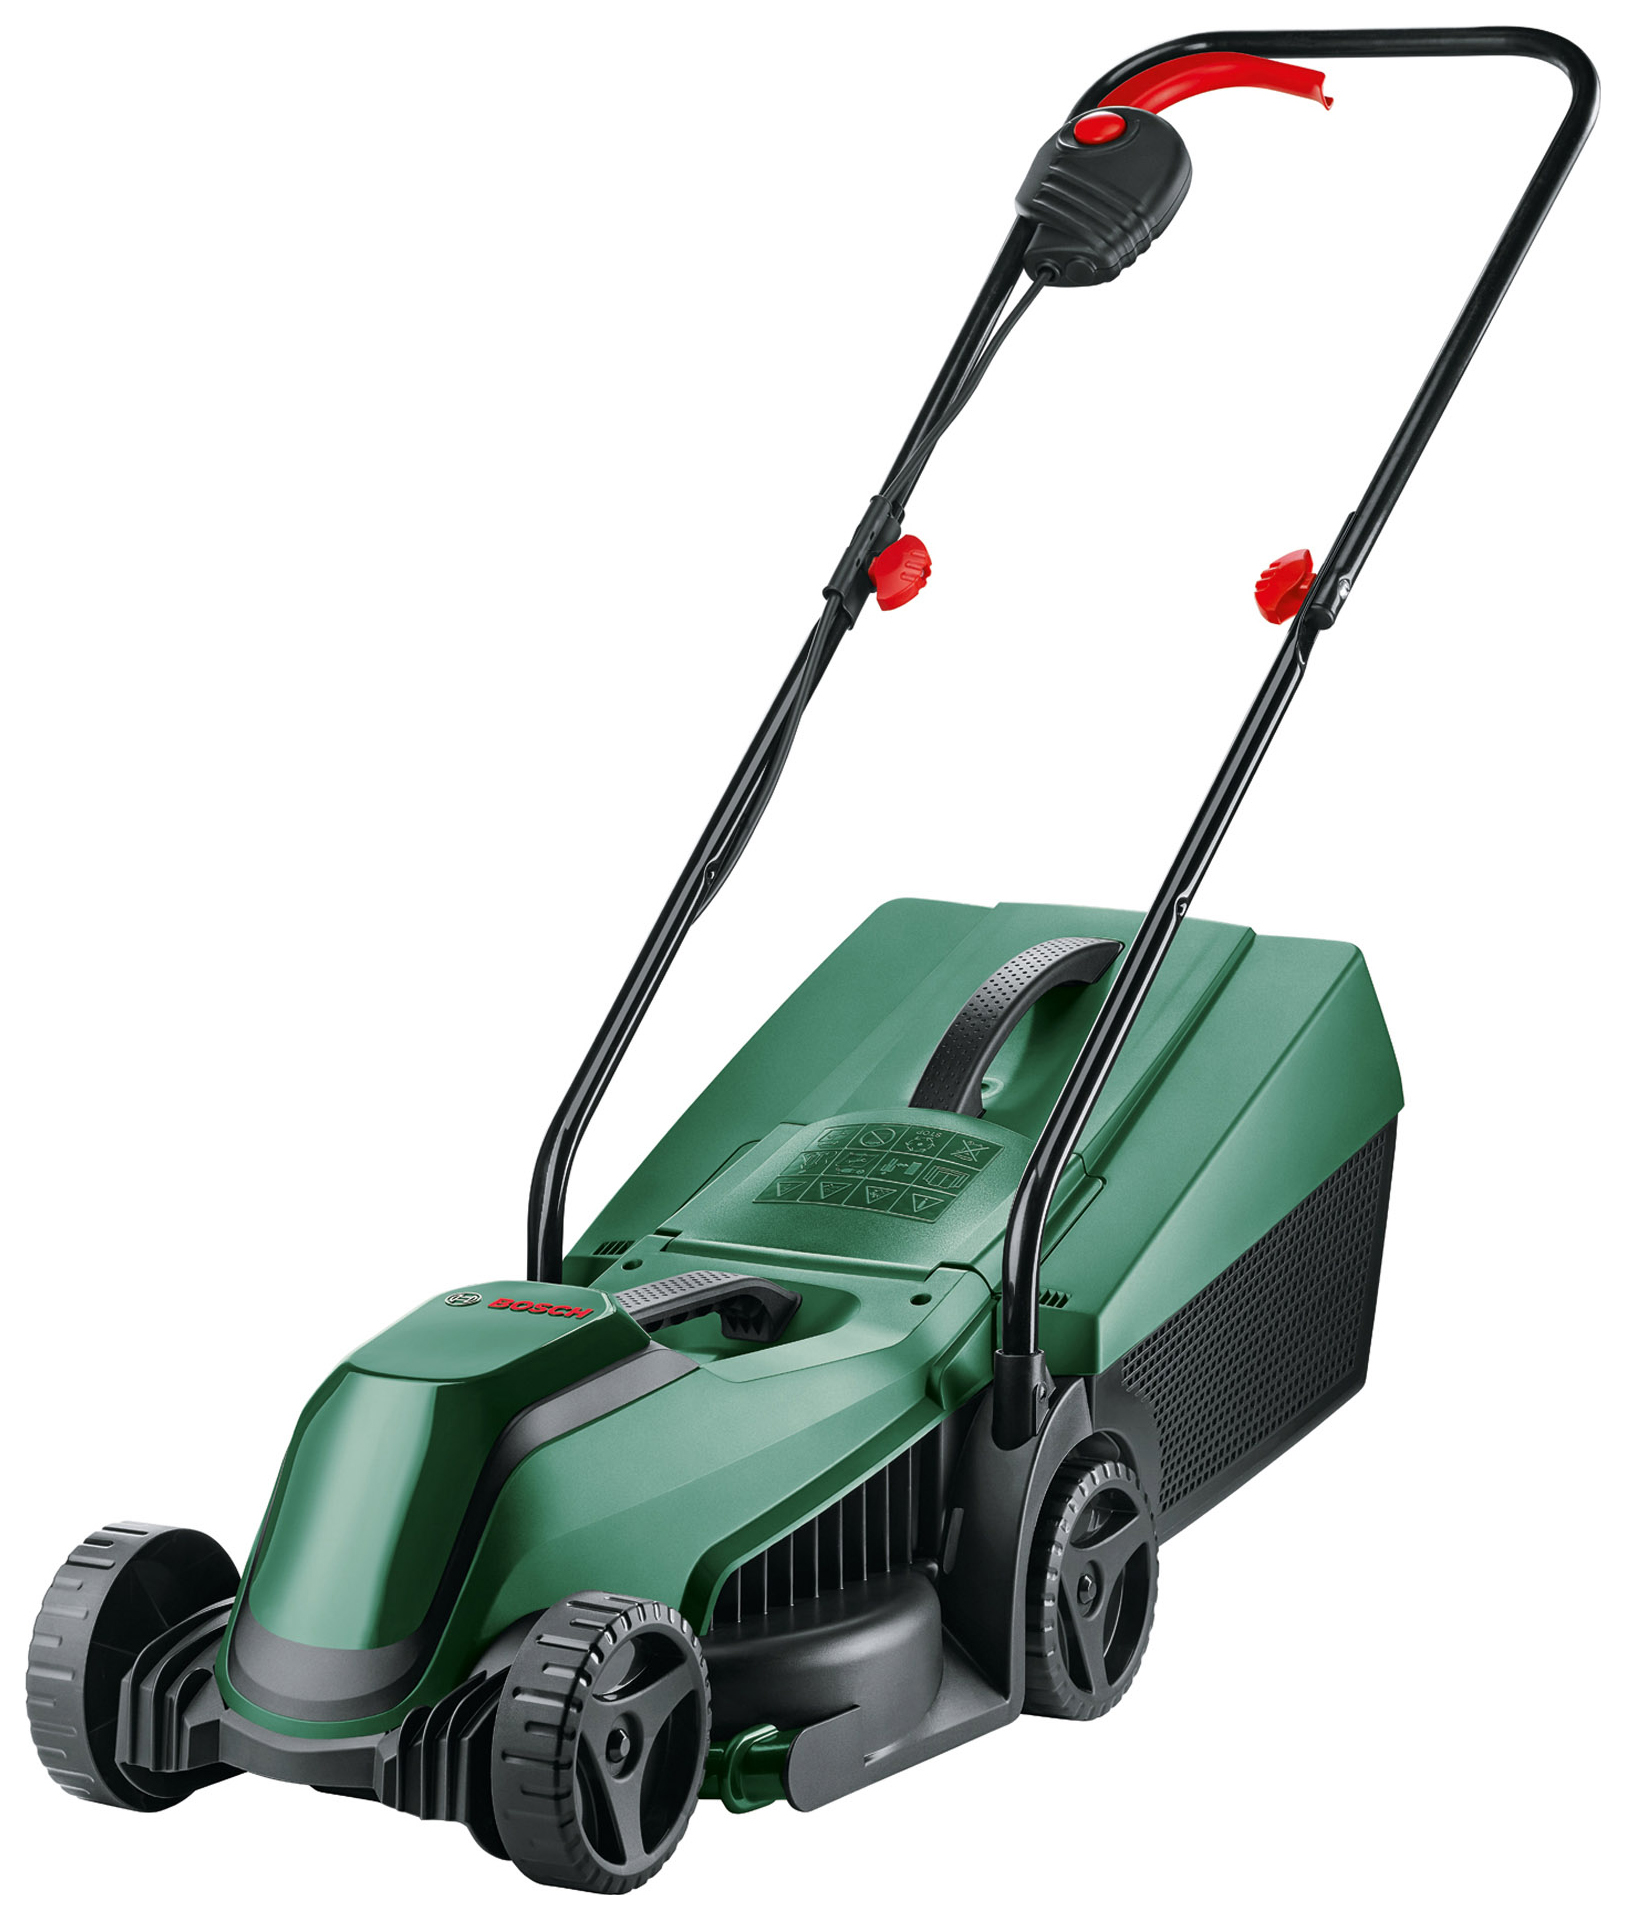 Image of Bosch Easy Mower 18V-32 Cordless Lawn Mower with 1x 4.0Ah Battery